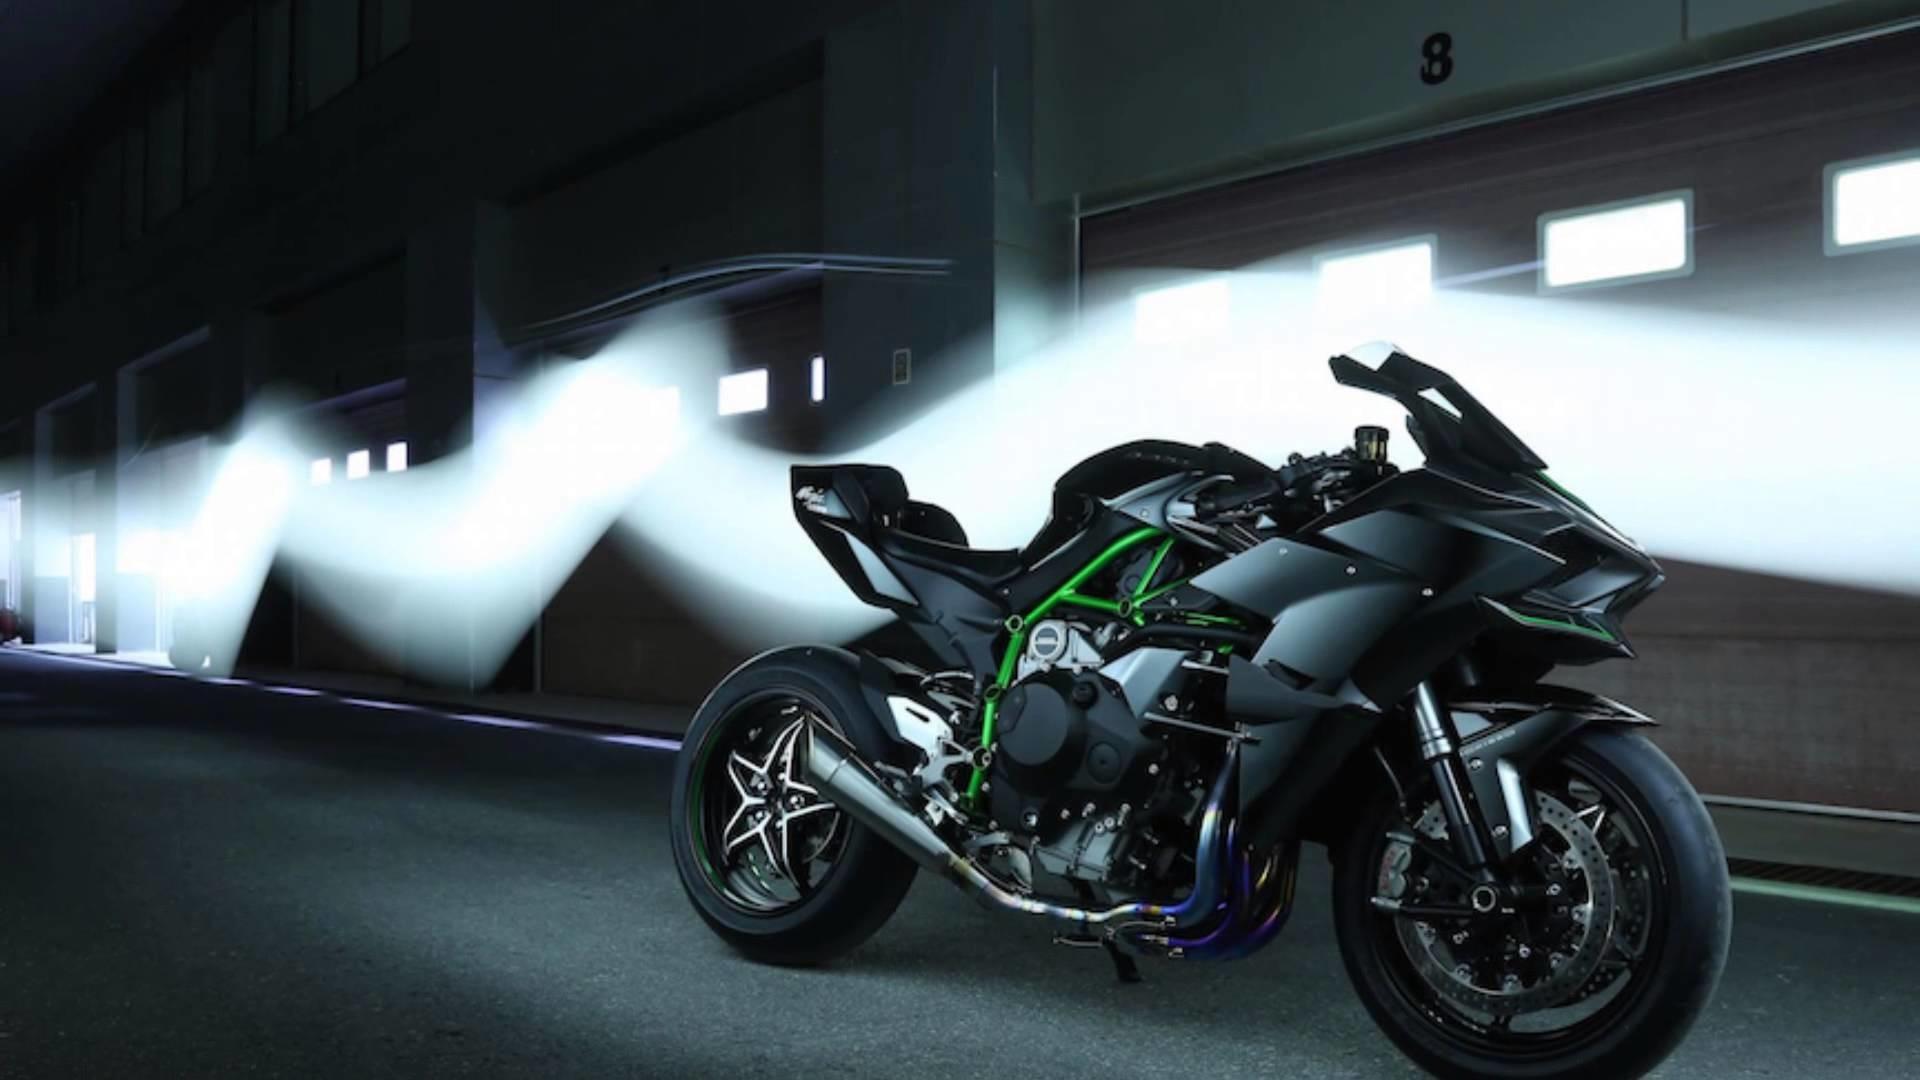 The Ninja H2R Wallpaper background picture